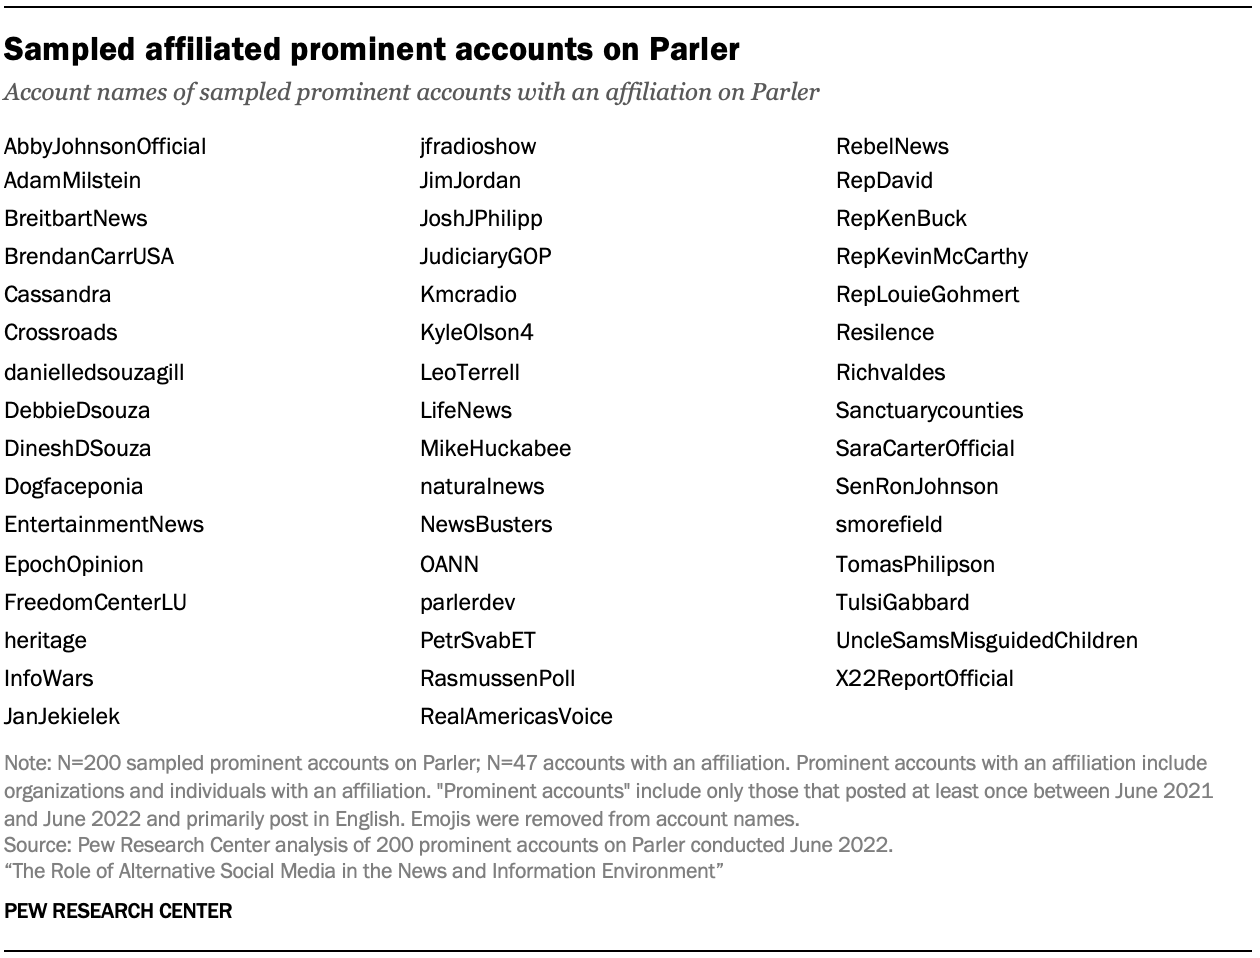 A table showing Sampled affiliated prominent accounts on Parler